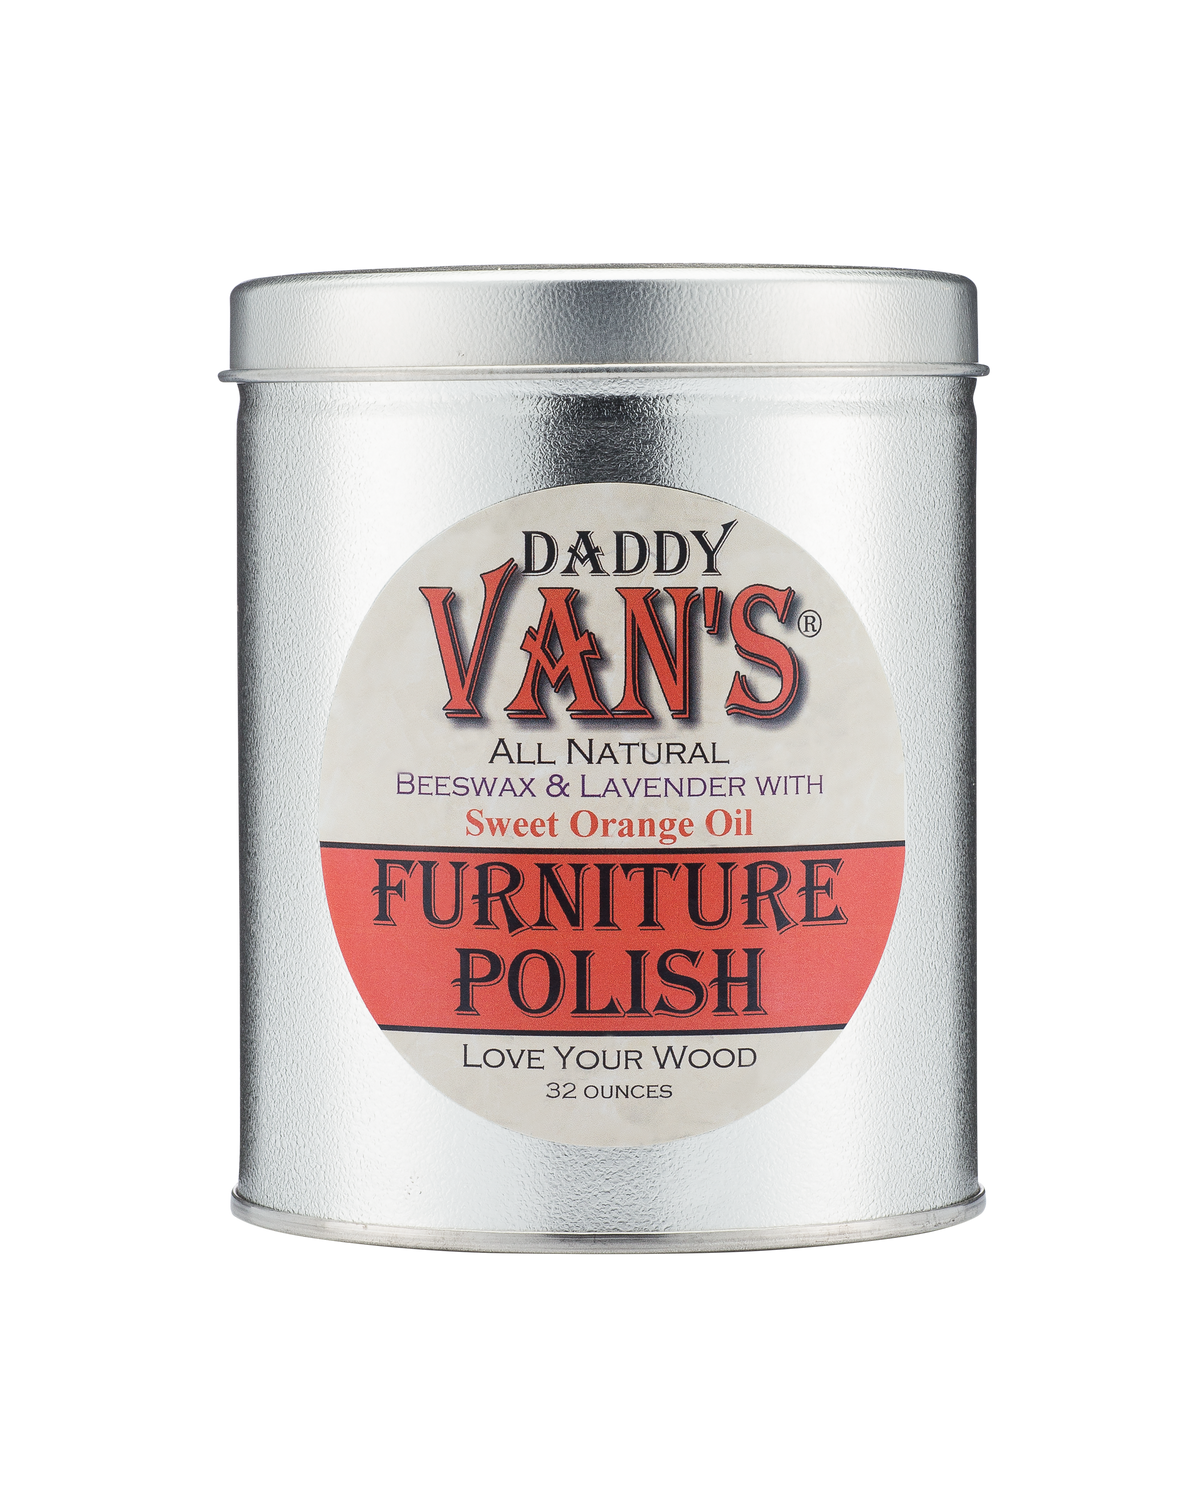 Daddy Van's All Natural Beeswax & Lavender with Sweet Orange Oil Furniture Polish - Big Daddy 32 Ounces